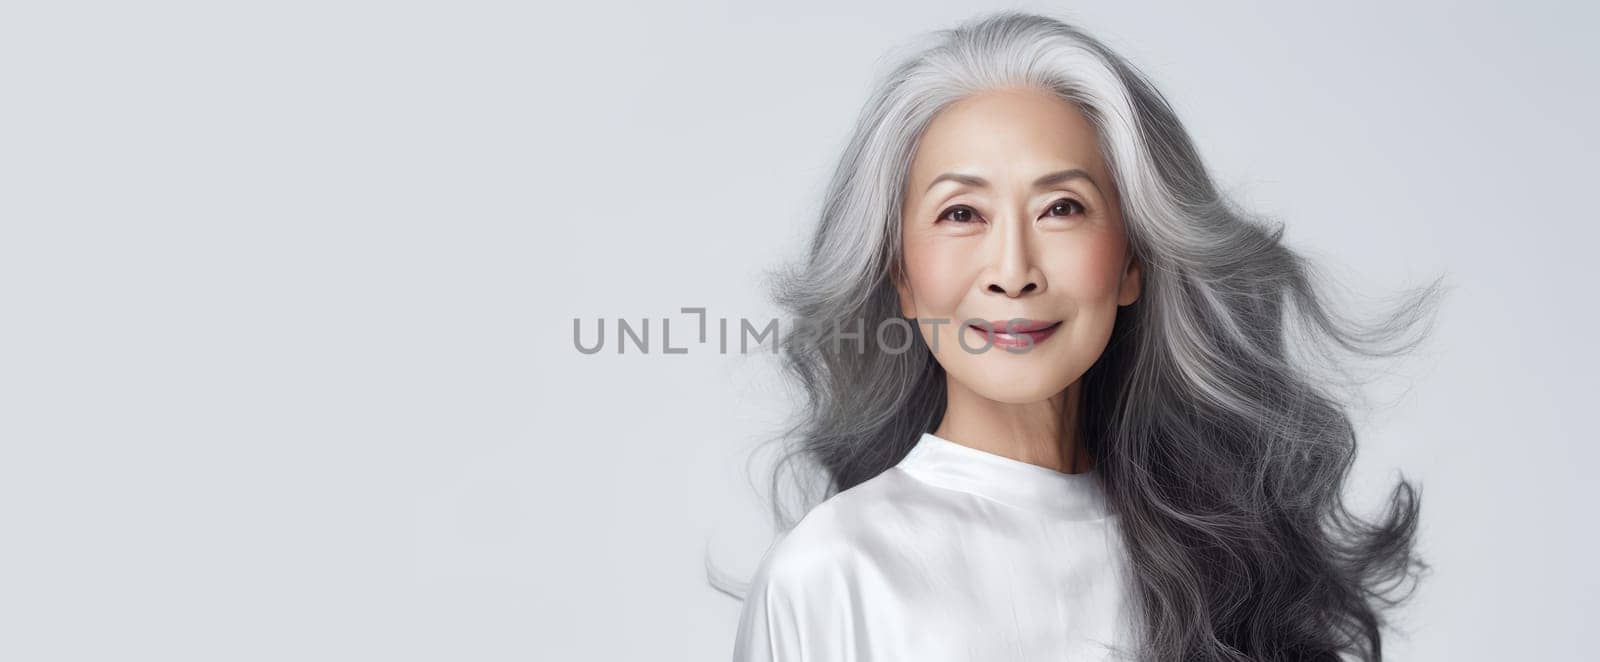 Smiling, elderly, chic Asian woman with gray long hair and perfect skin, on white background, banner. Advertising of cosmetic products, spa treatments, shampoos and hair care products, dentistry and medicine, perfumes and cosmetology for senior women